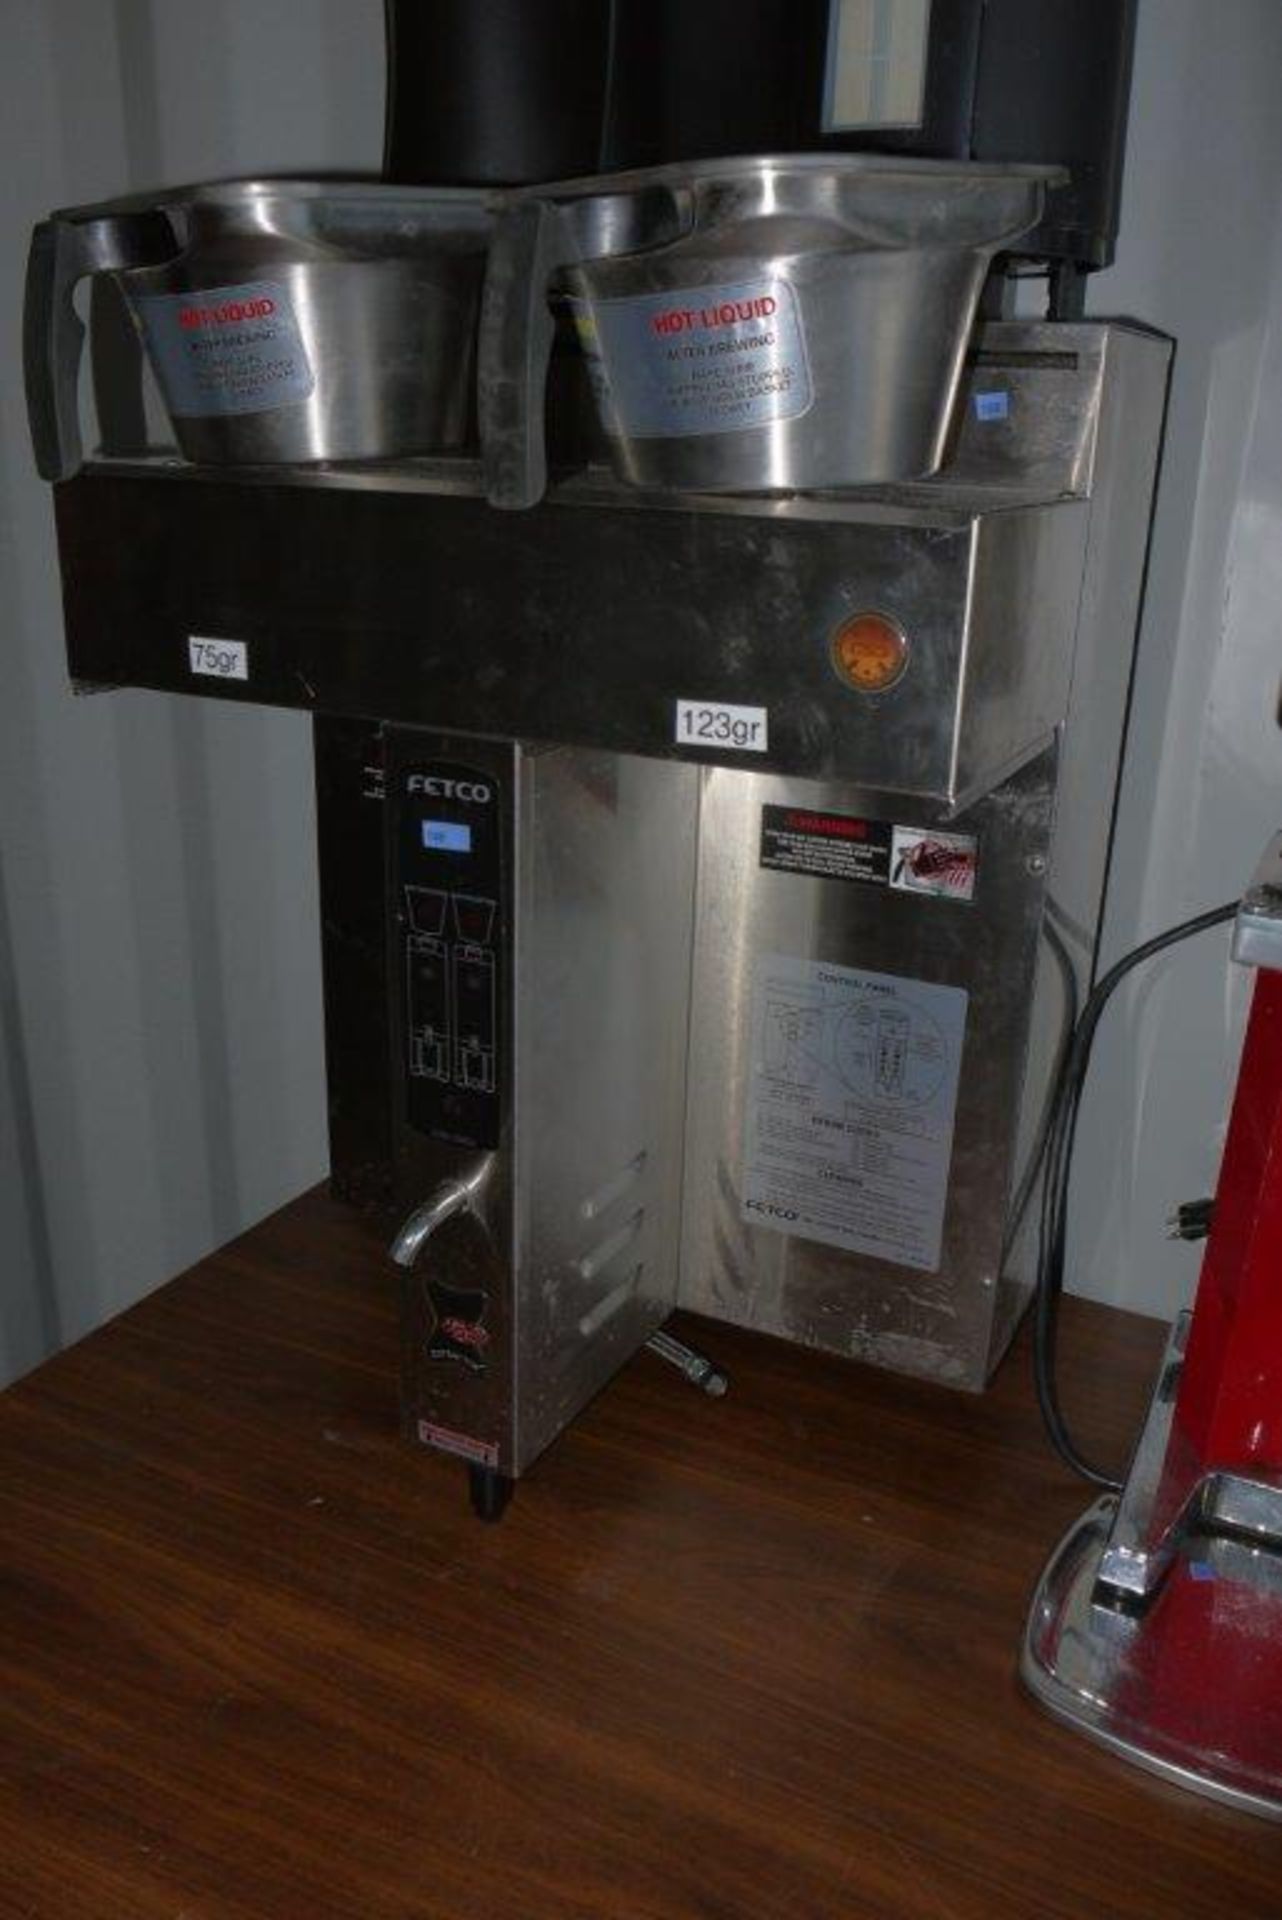 2013 FETCO DOUBLE STATION COFFEE BREWER, MODEL CBS 2032E, S/N 720143138478, SINGLE PHASE, C/W - Image 5 of 9